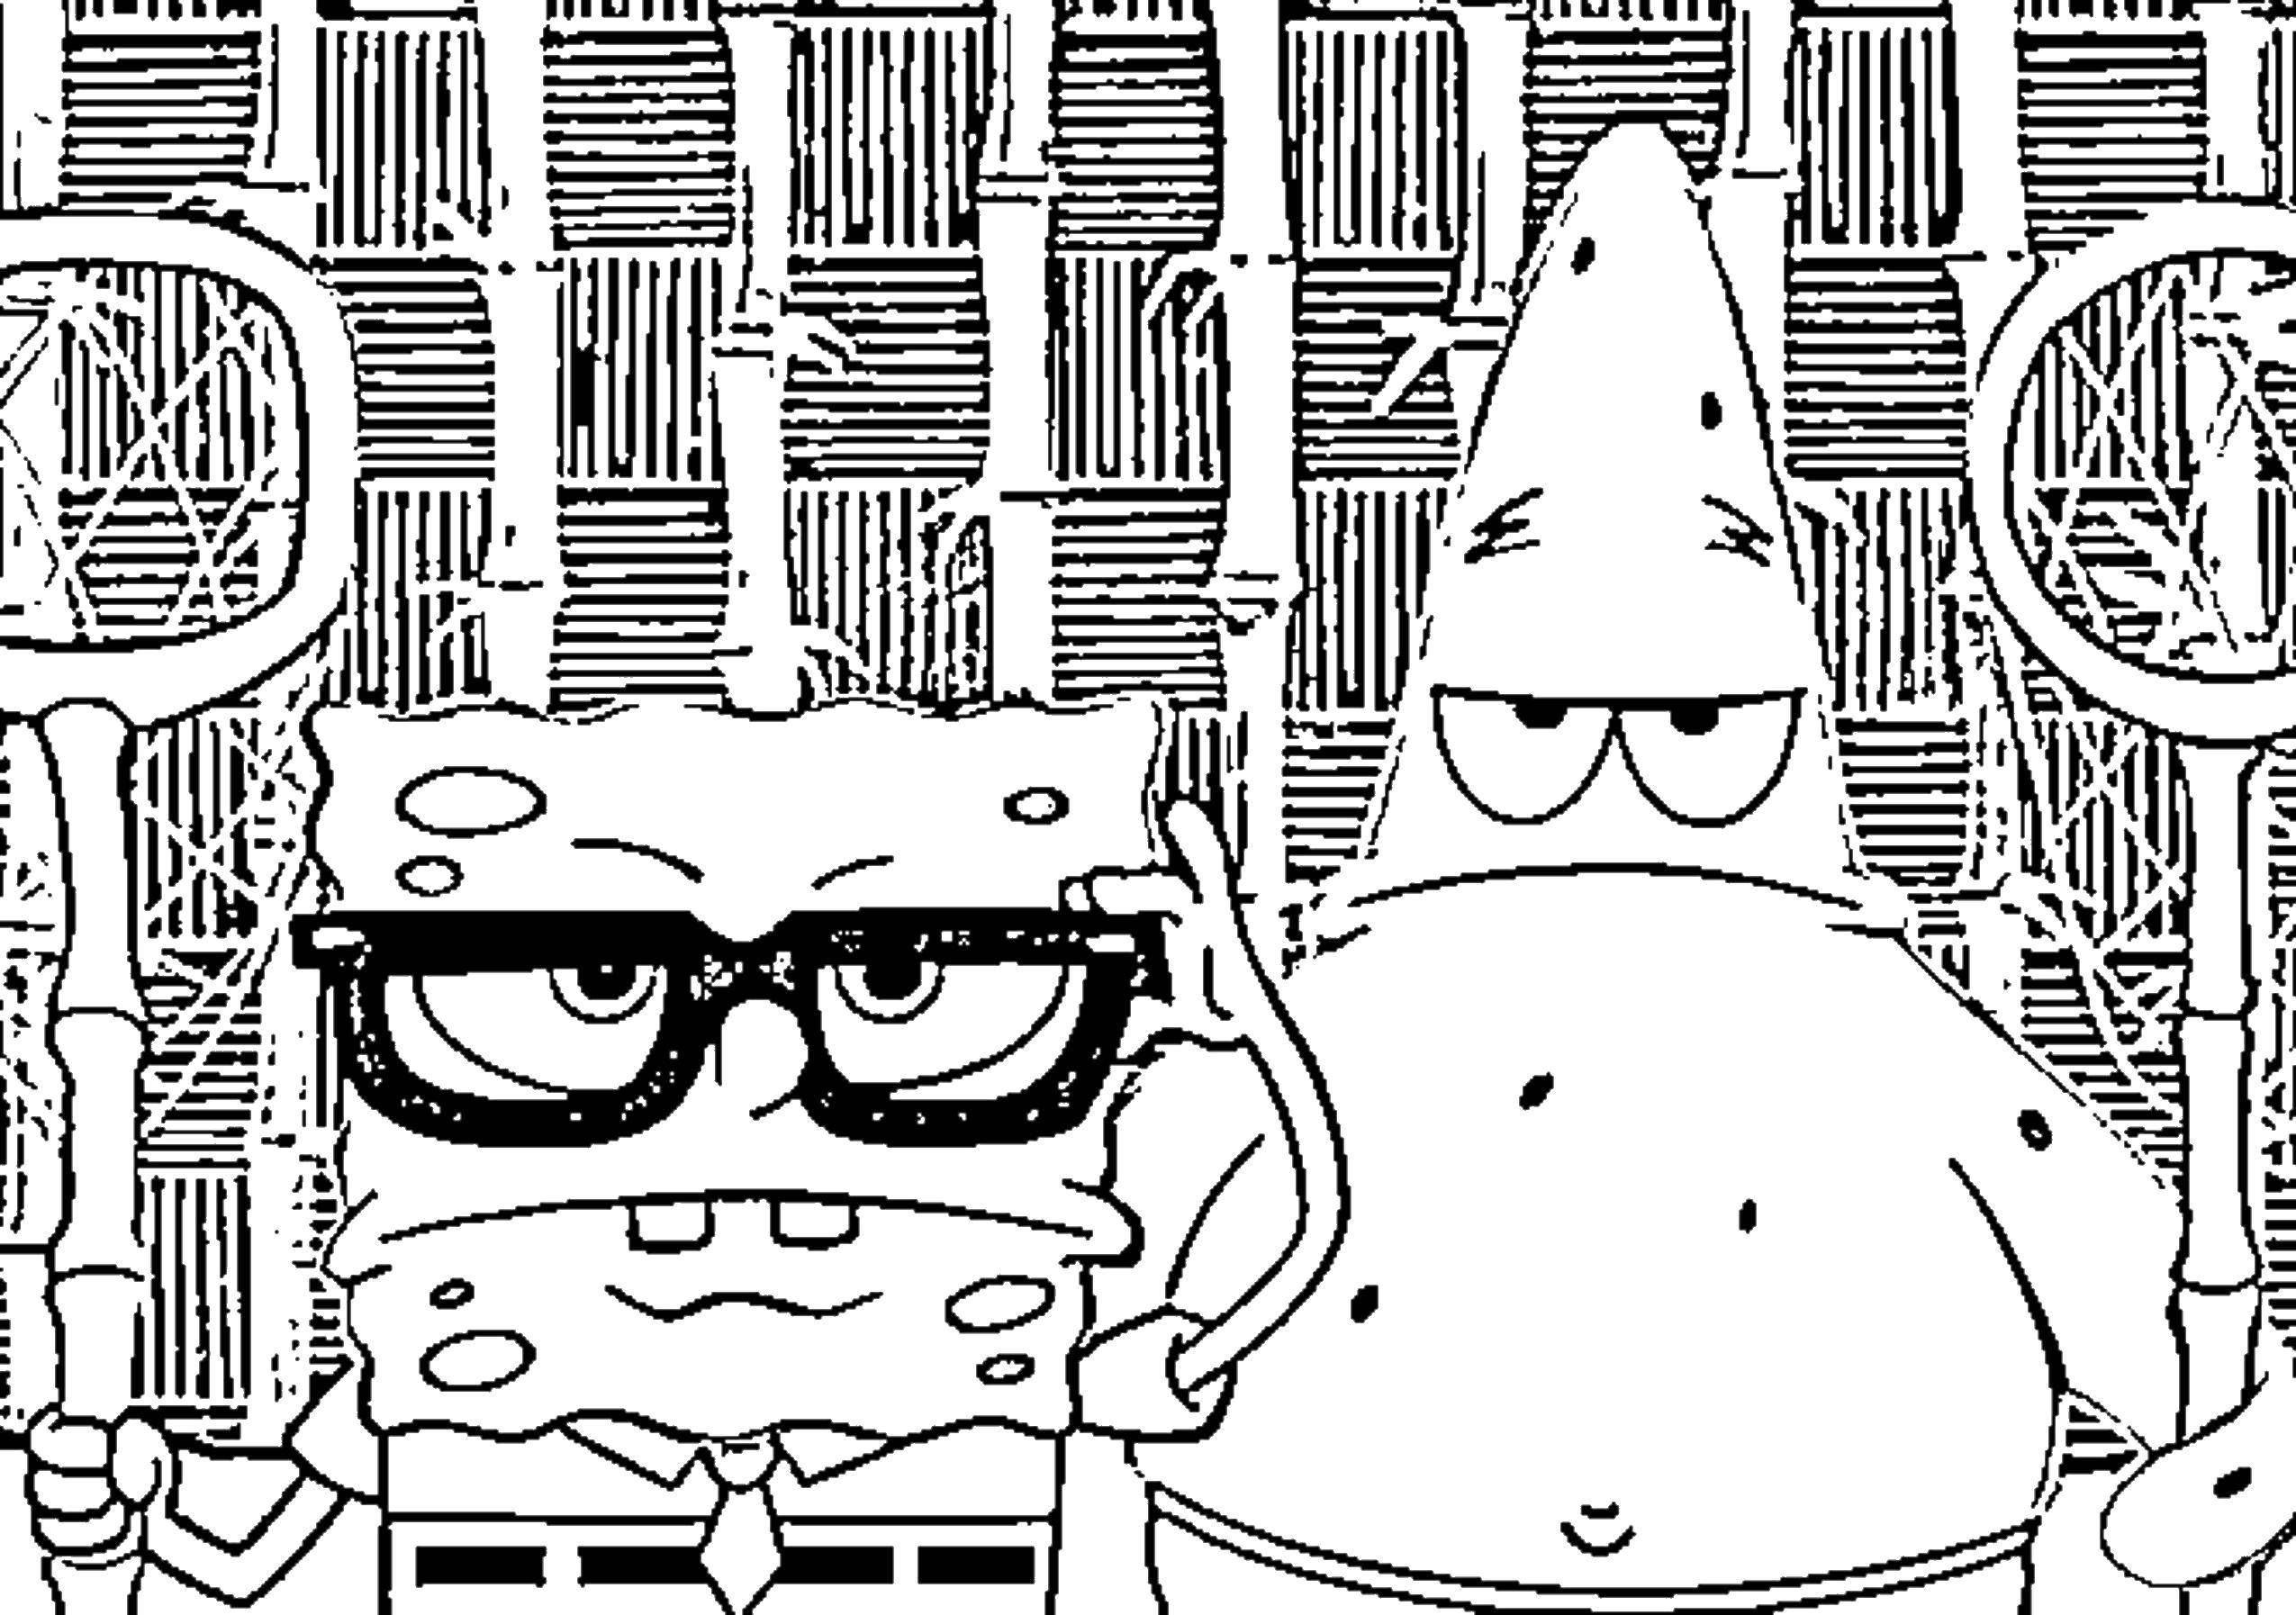 Coloring Spongebob and Patrick with nets. Category Spongebob. Tags:  the spongebob, Patrick, goggles, nets.